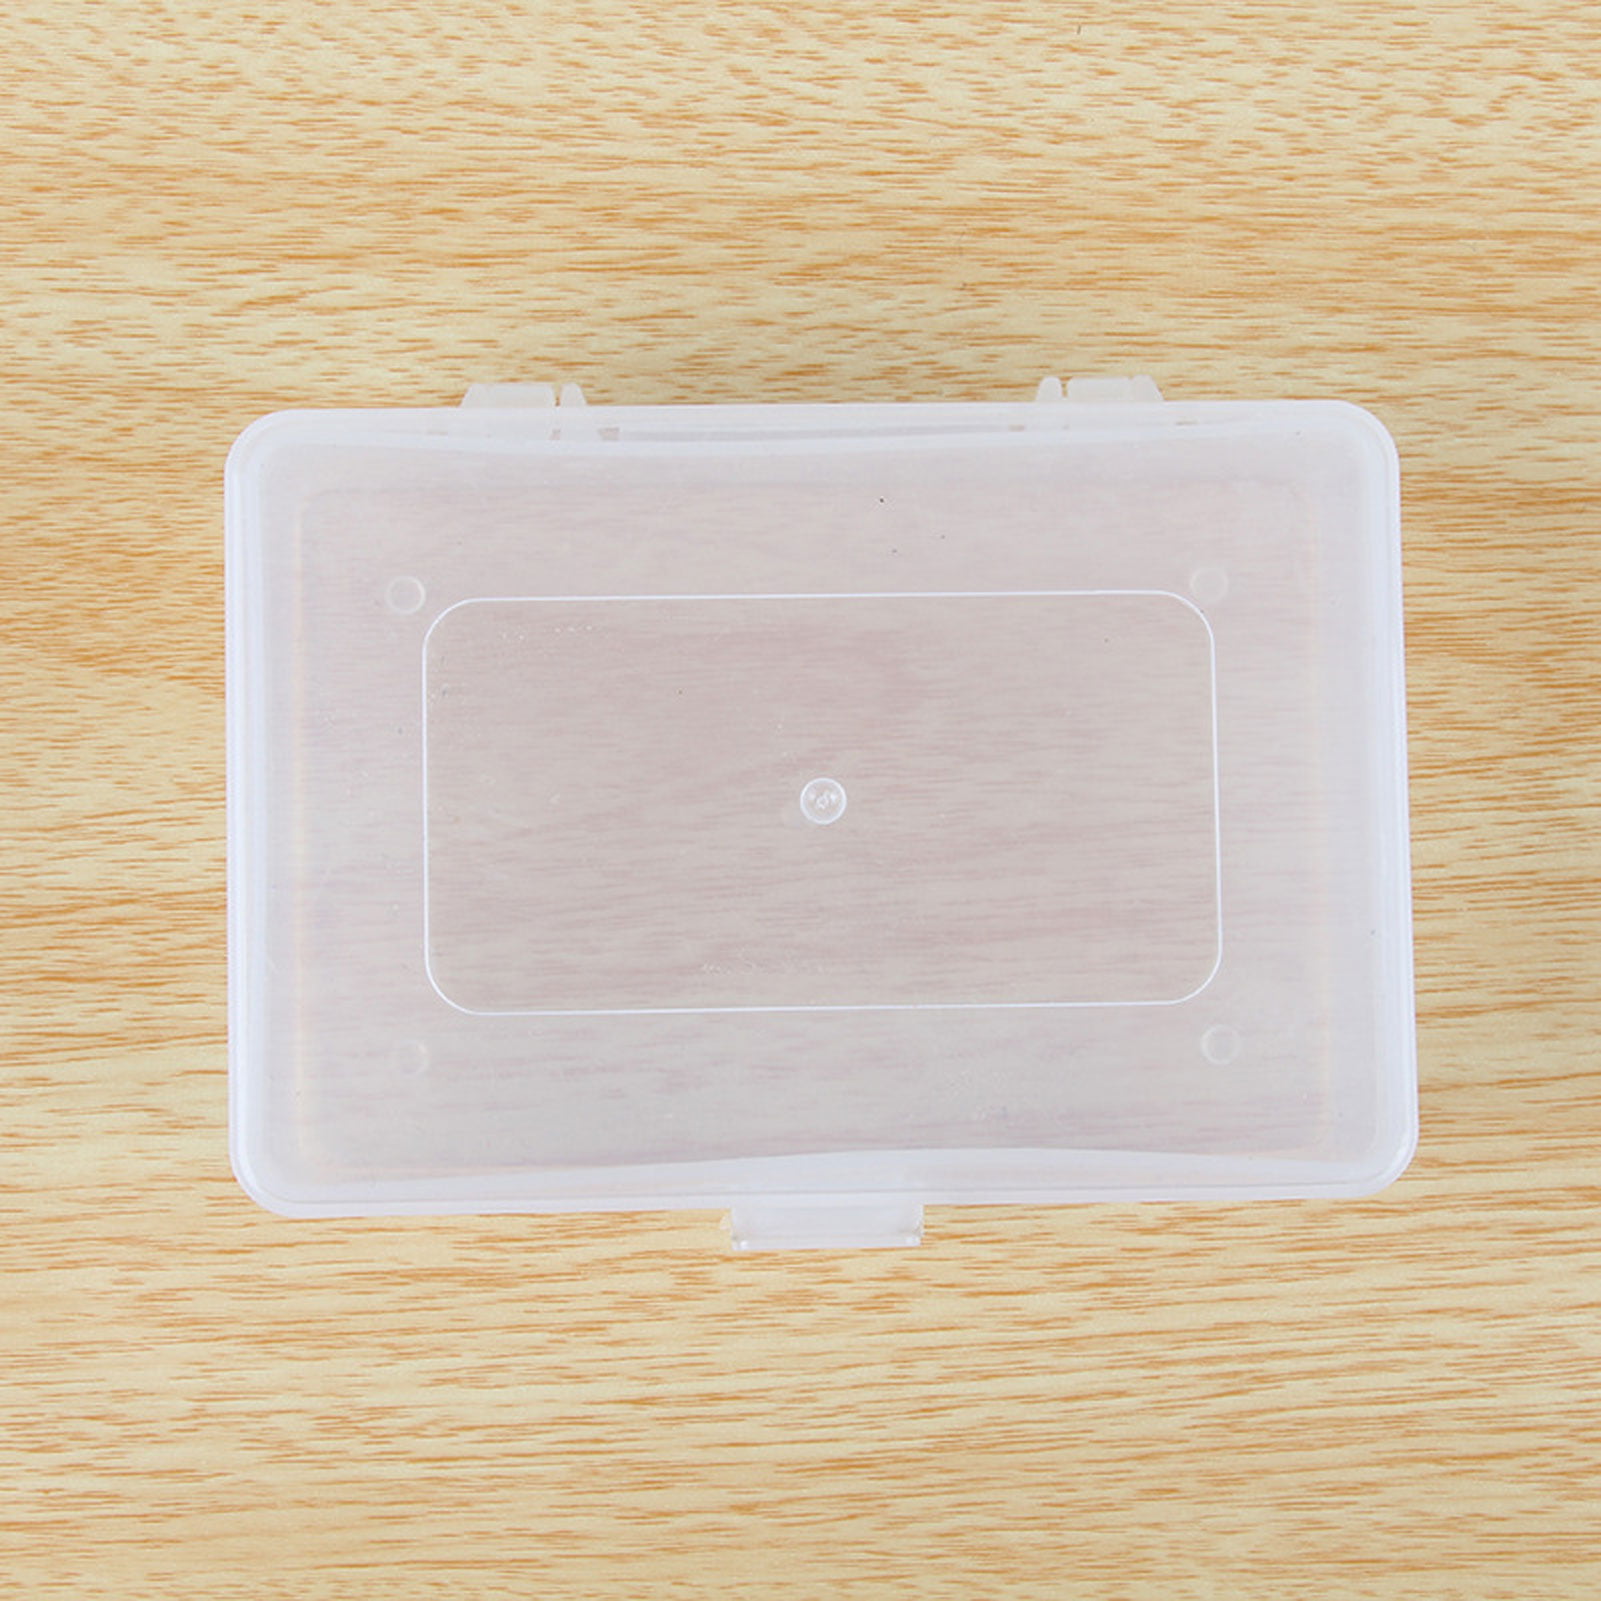 Teensery Small Square Clear Plastic Containers Box with Lid for Coins  Crafts Clips Beads Jewelry Nail Rhinestones Storage Box Case